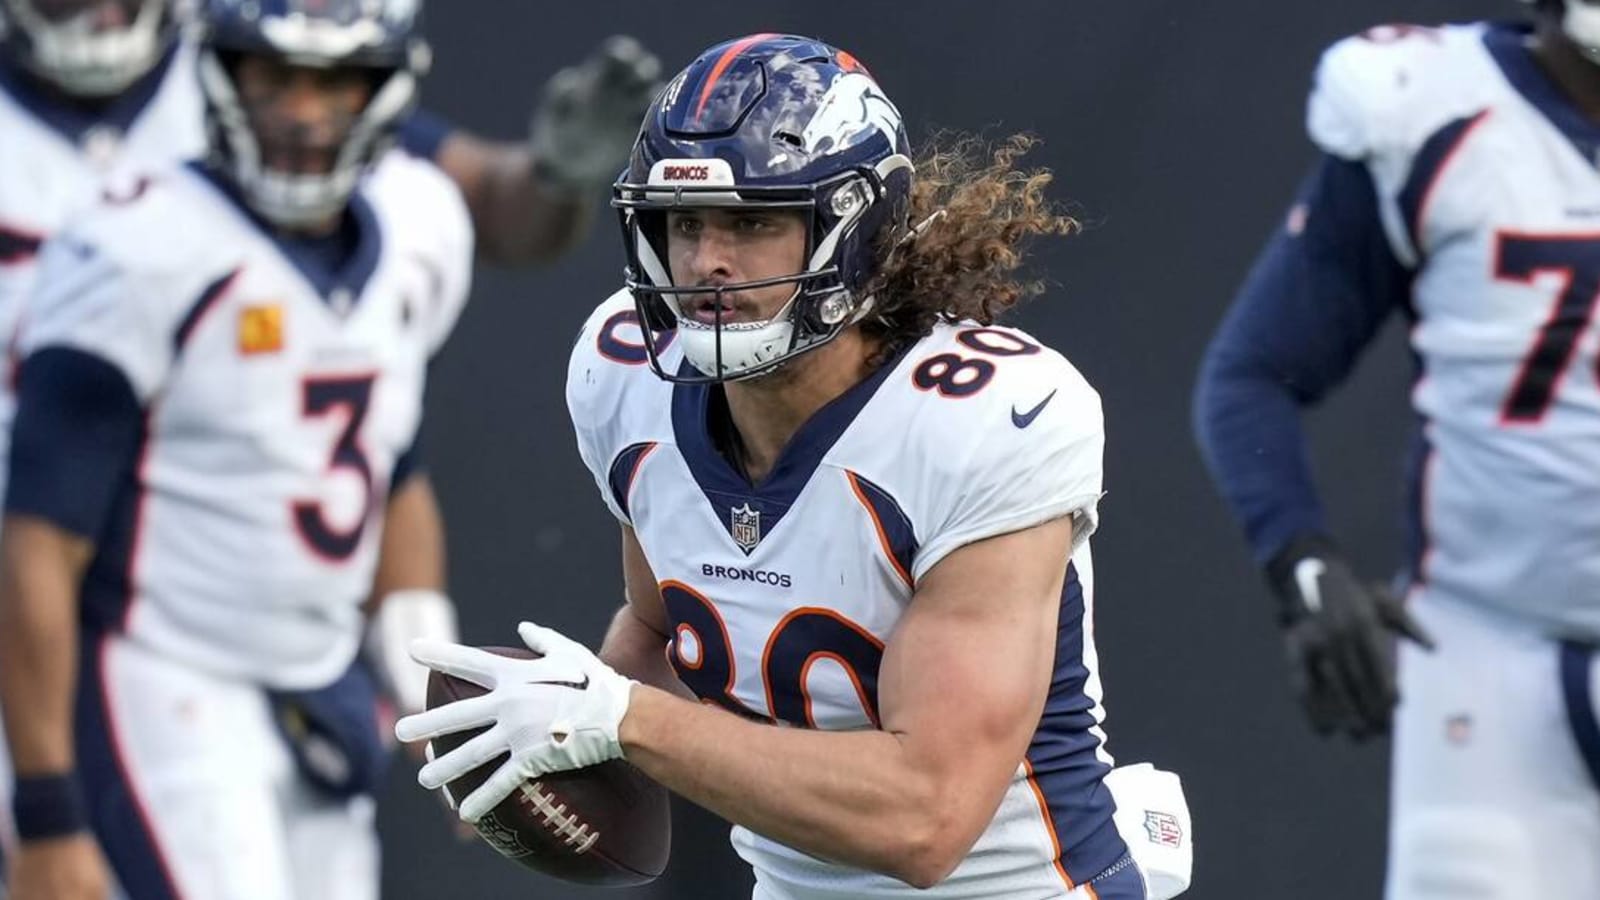 Broncos get bad news on young offensive weapon